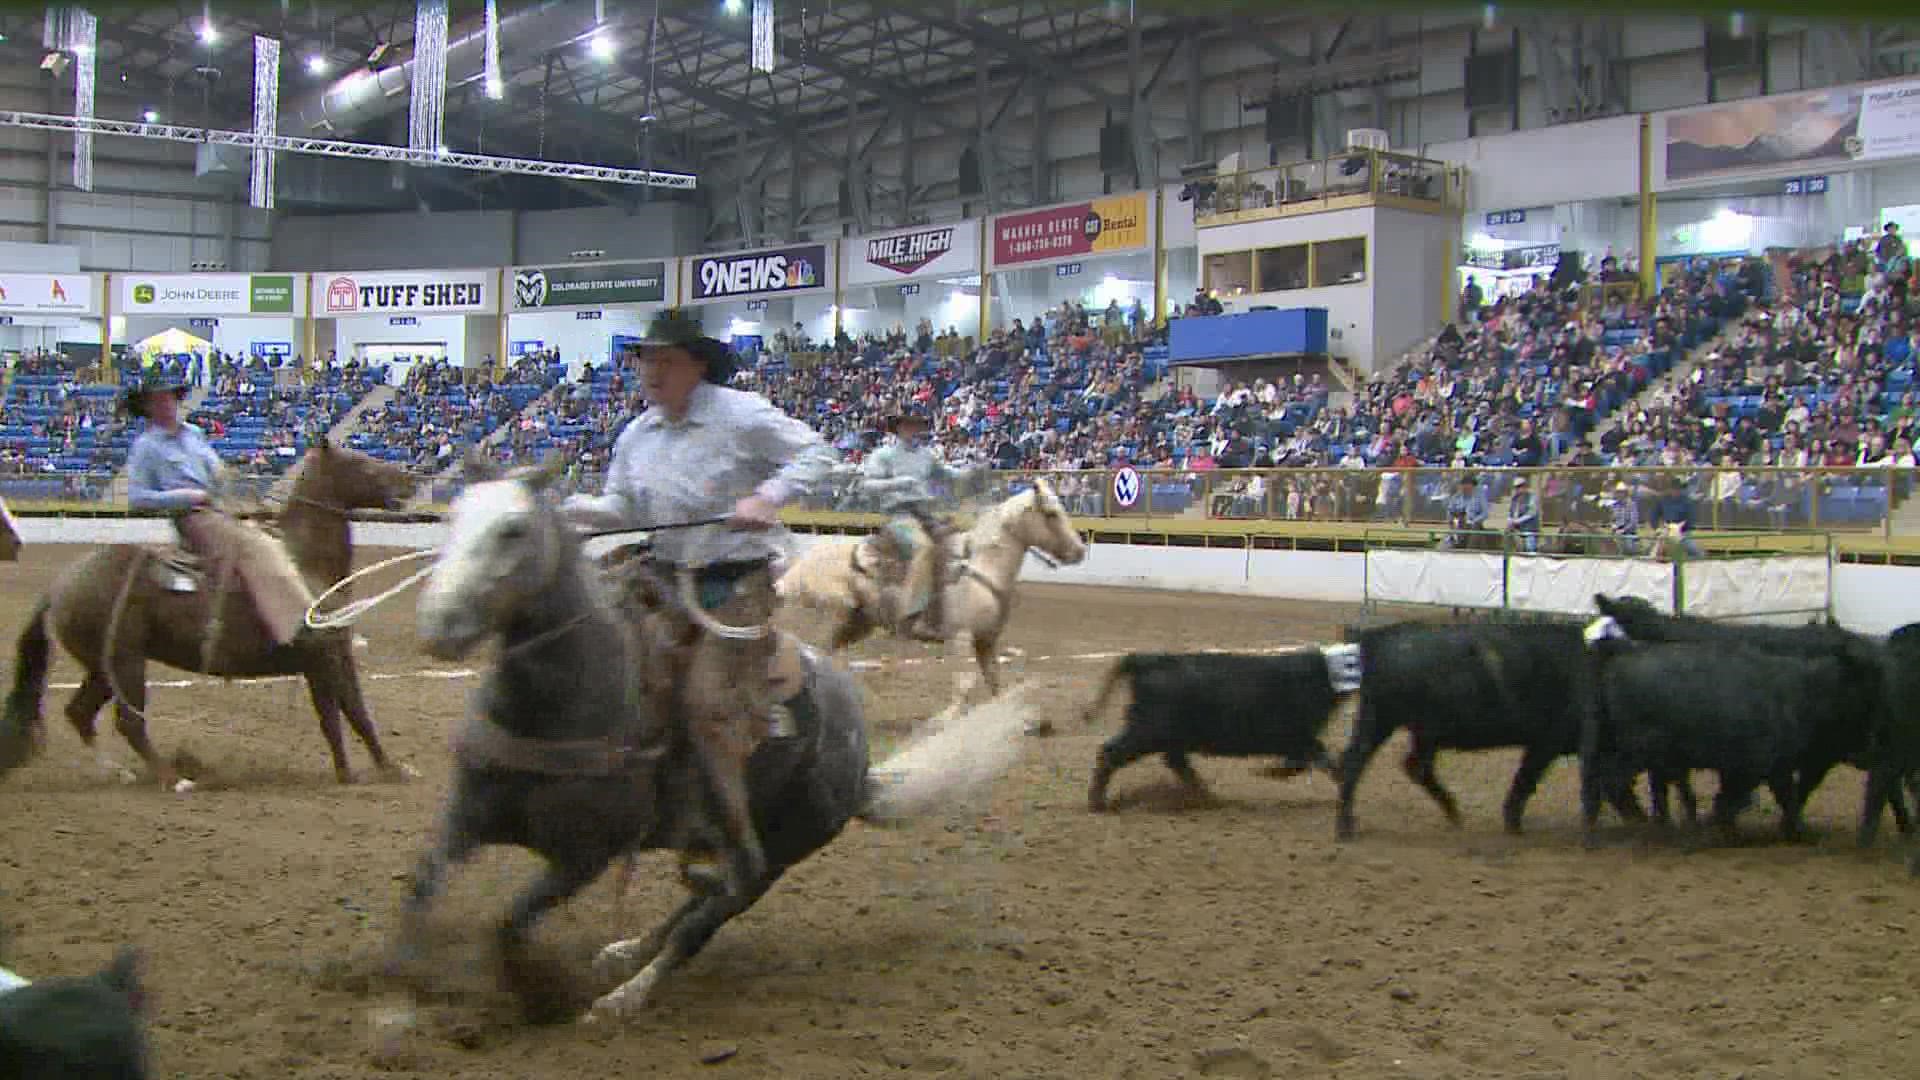 This is not your typical rodeo.